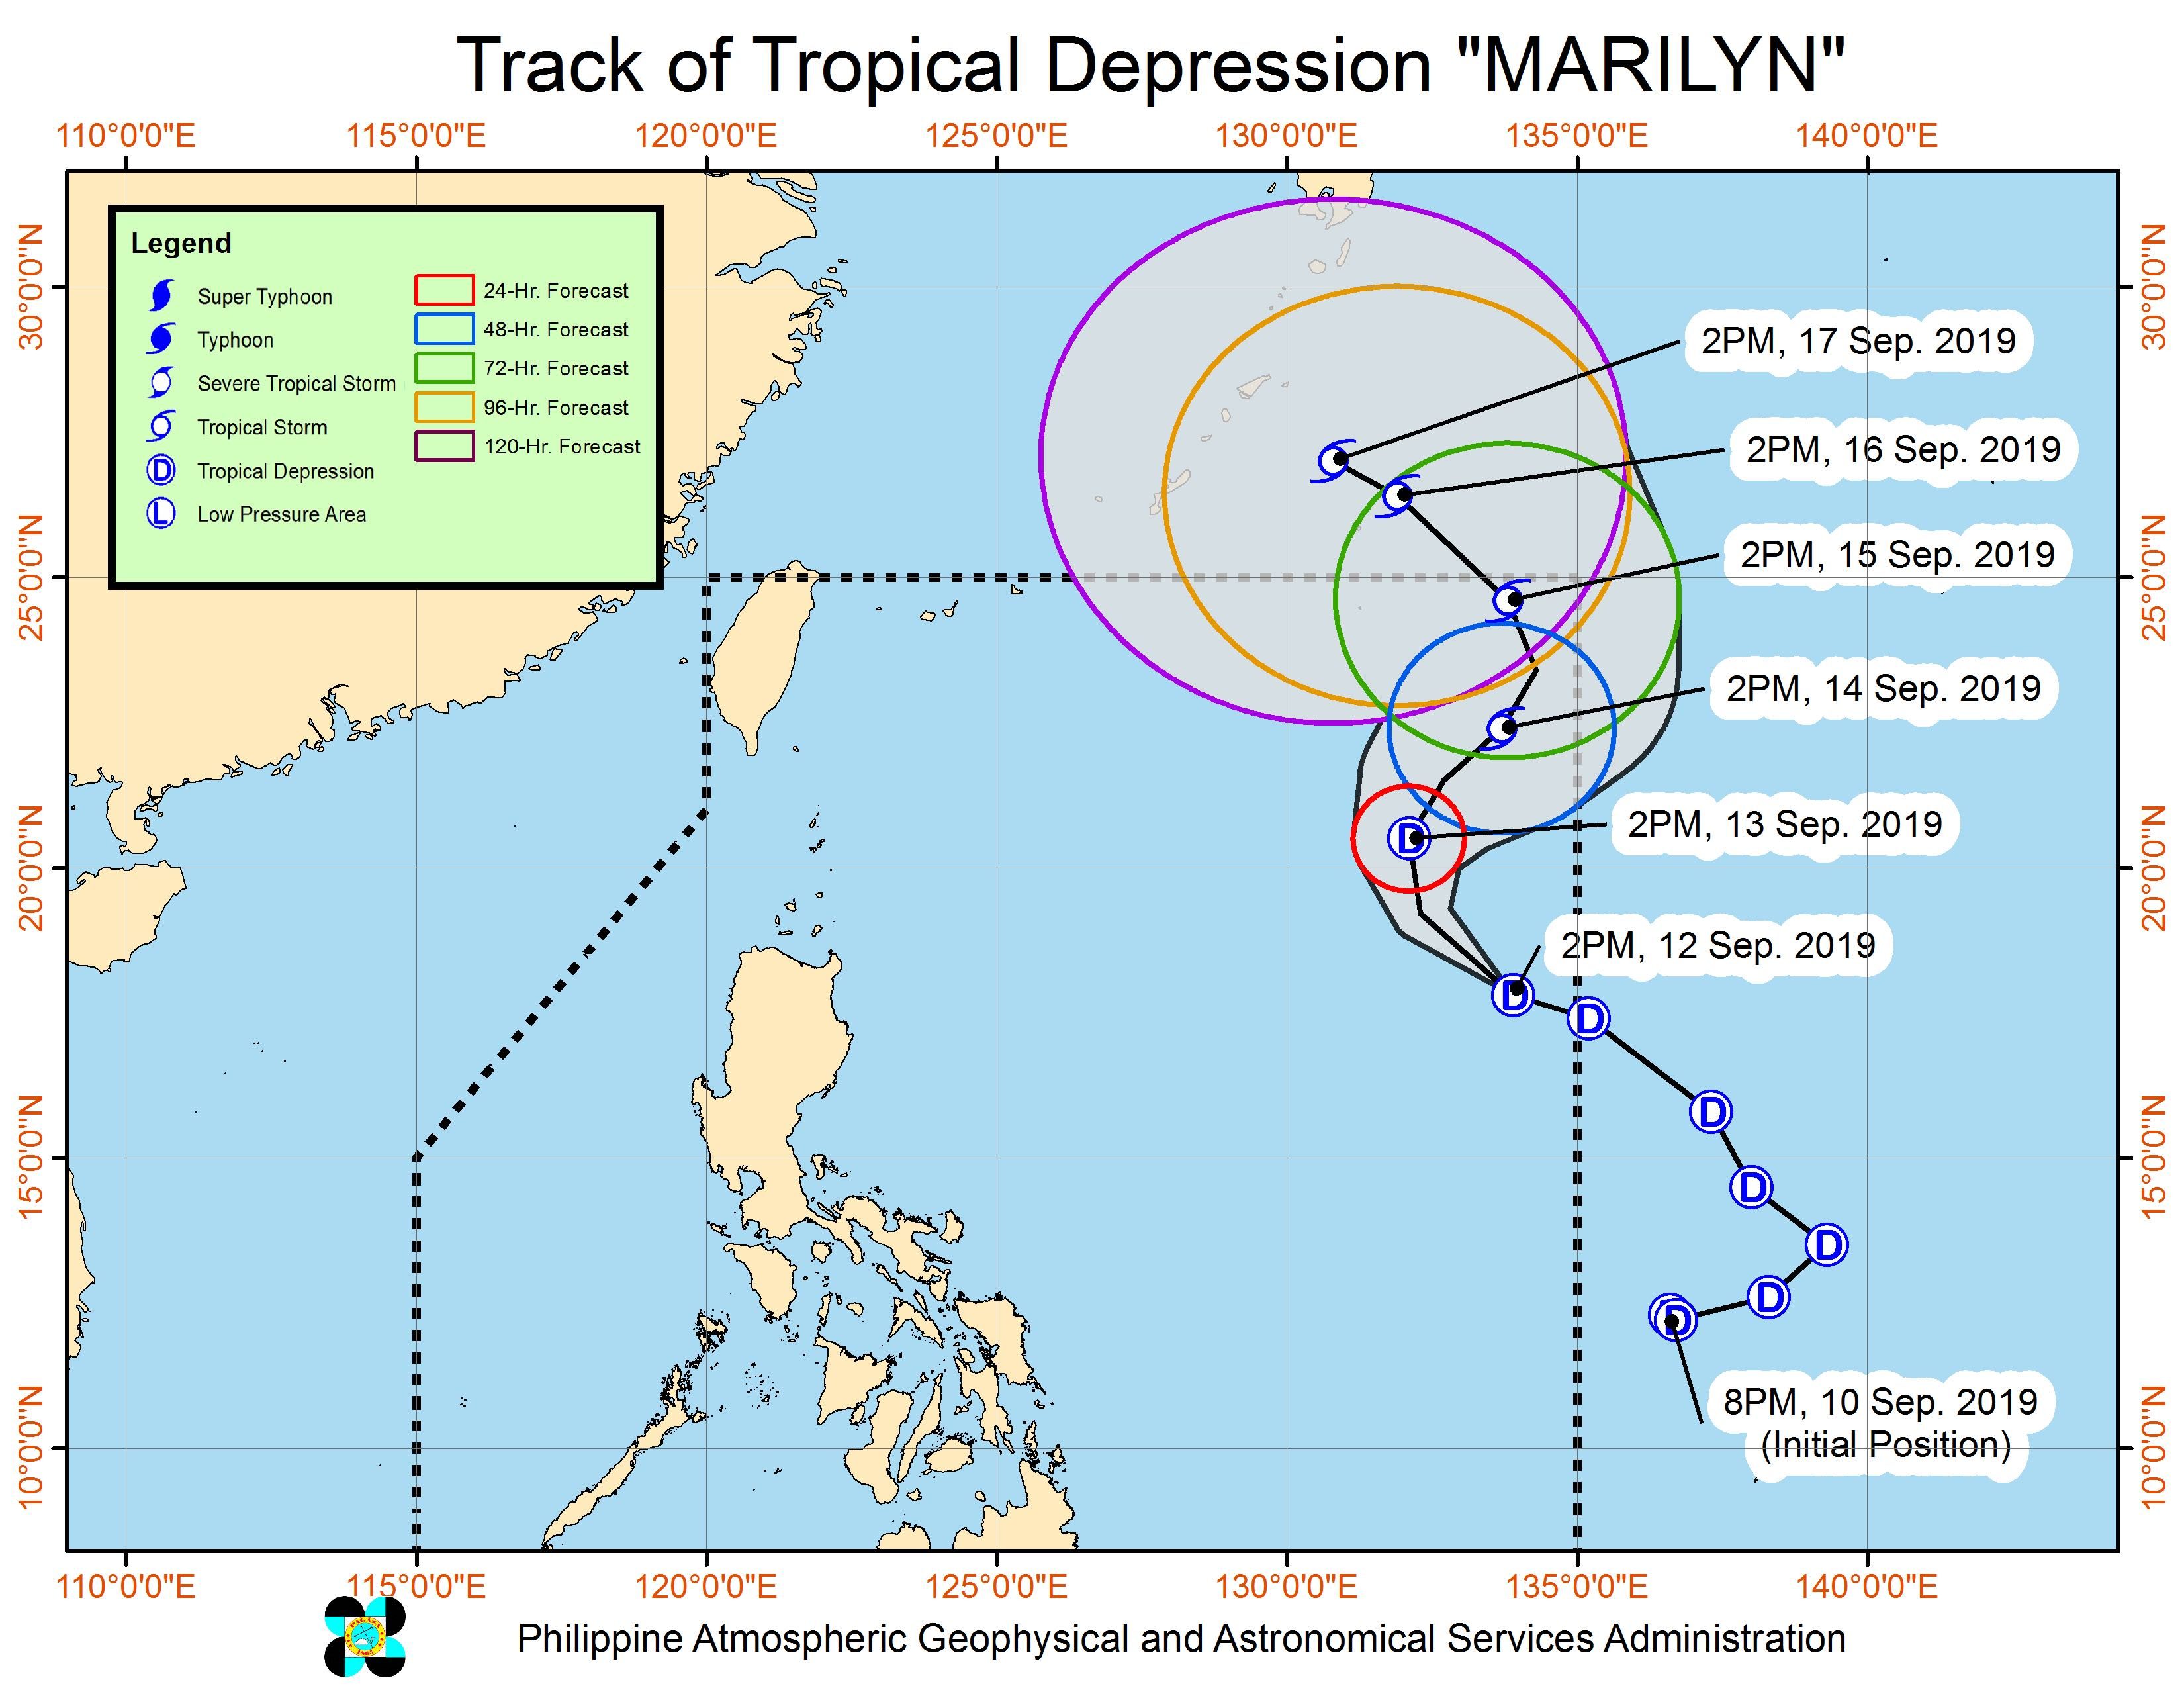 Forecast track of Tropical Depression Marilyn as of September 12, 2019, 5 pm. Image from PAGASA 